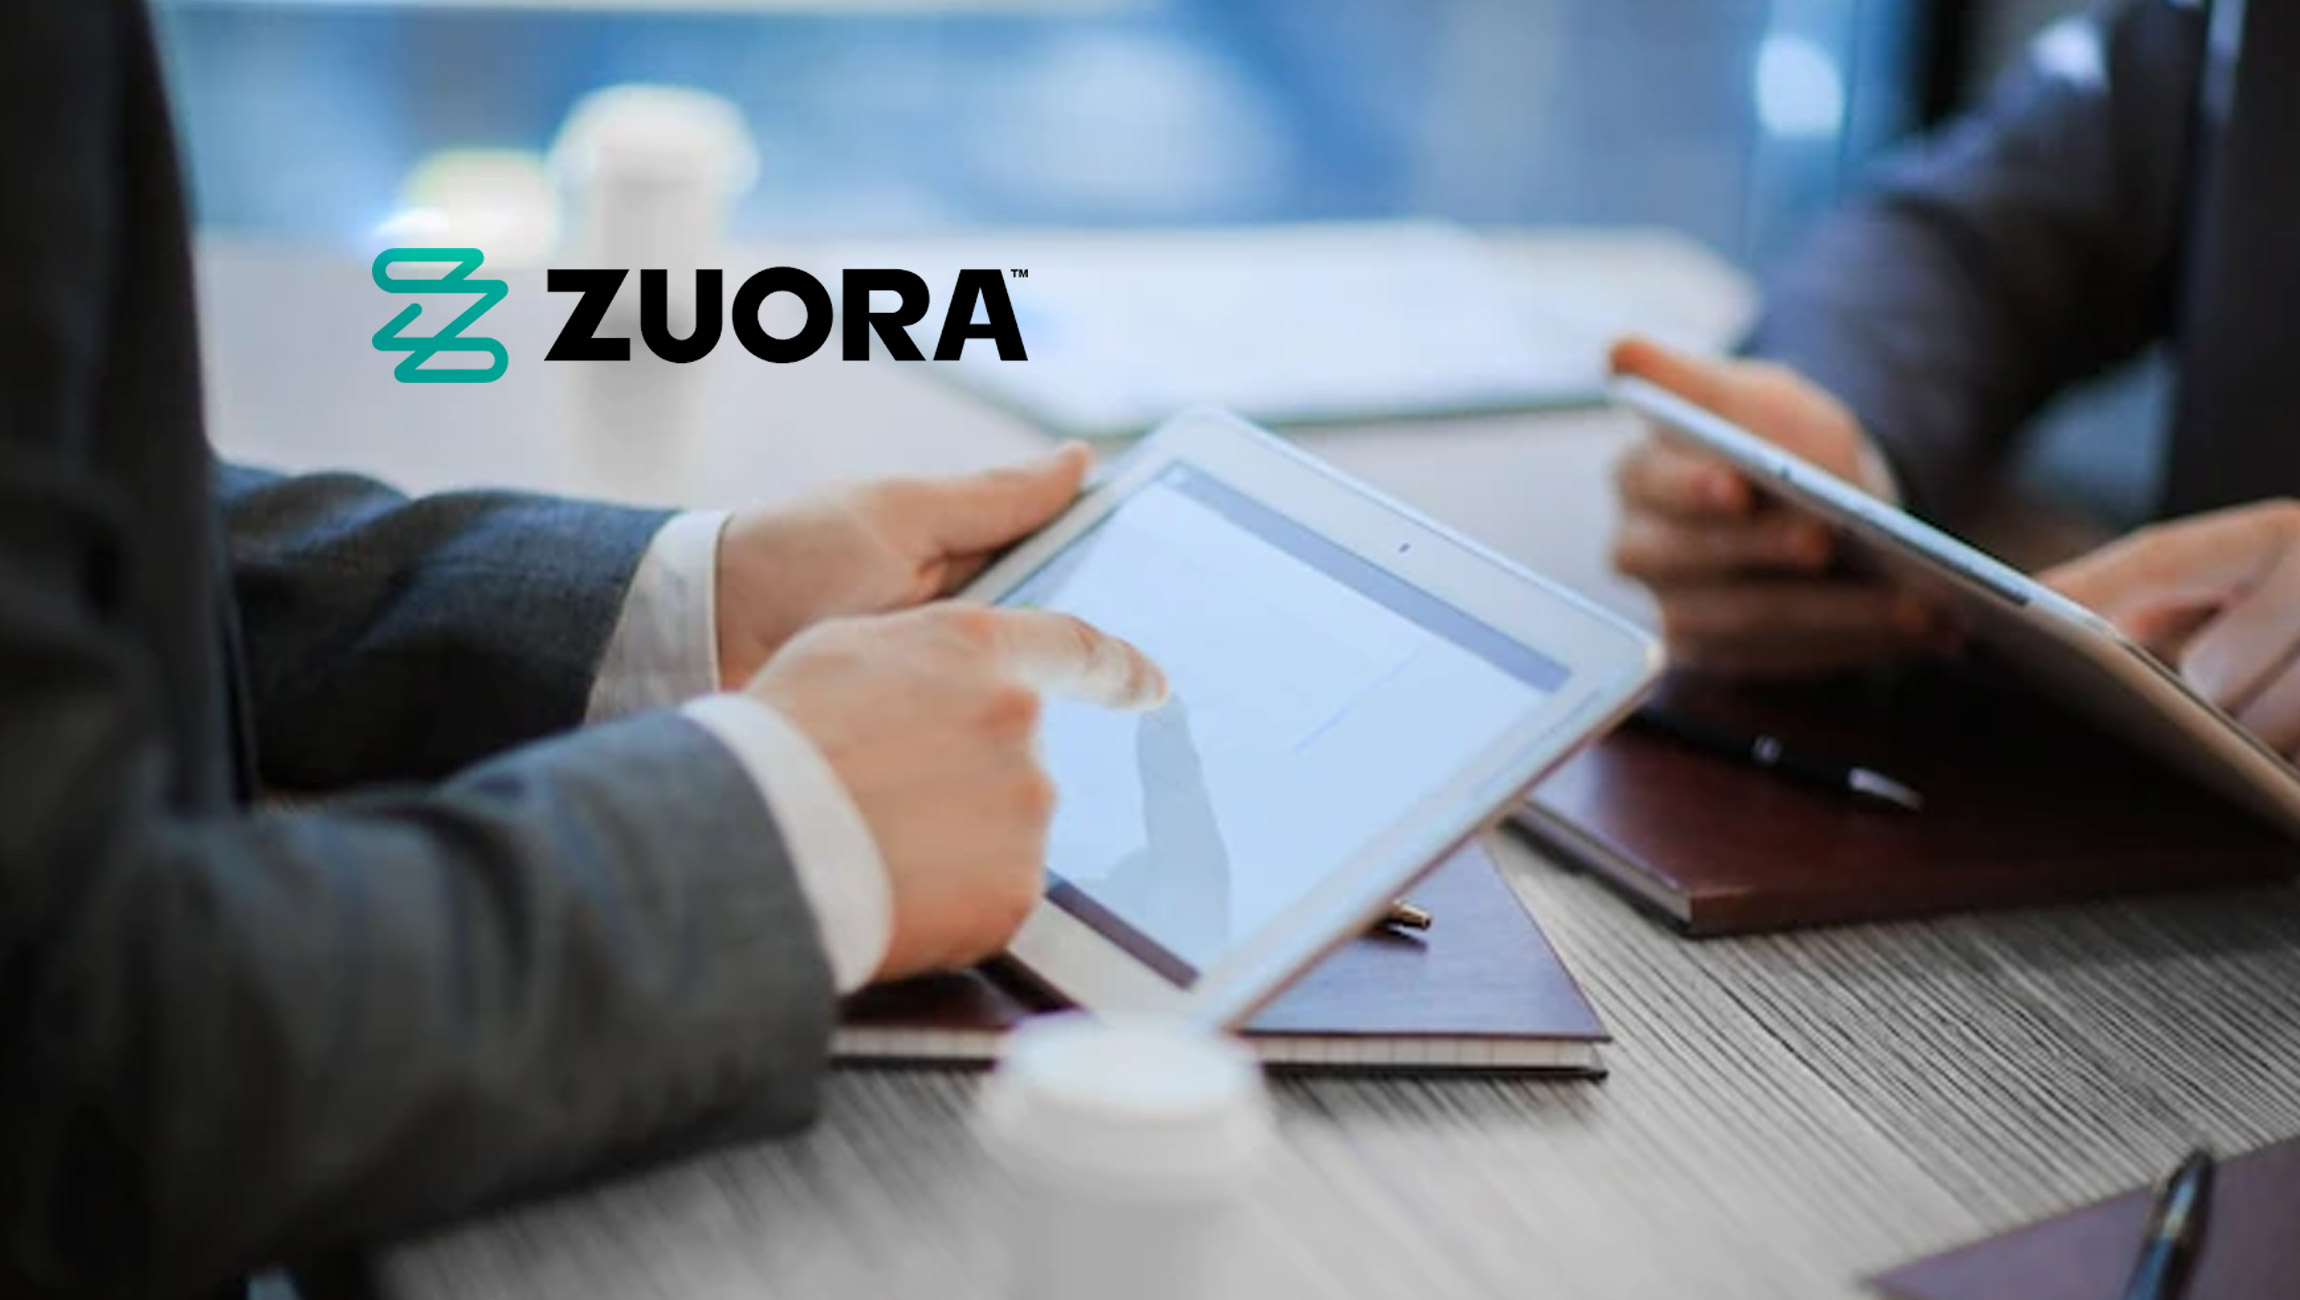 Zuora Expands India Footprint with New Office in Chennai